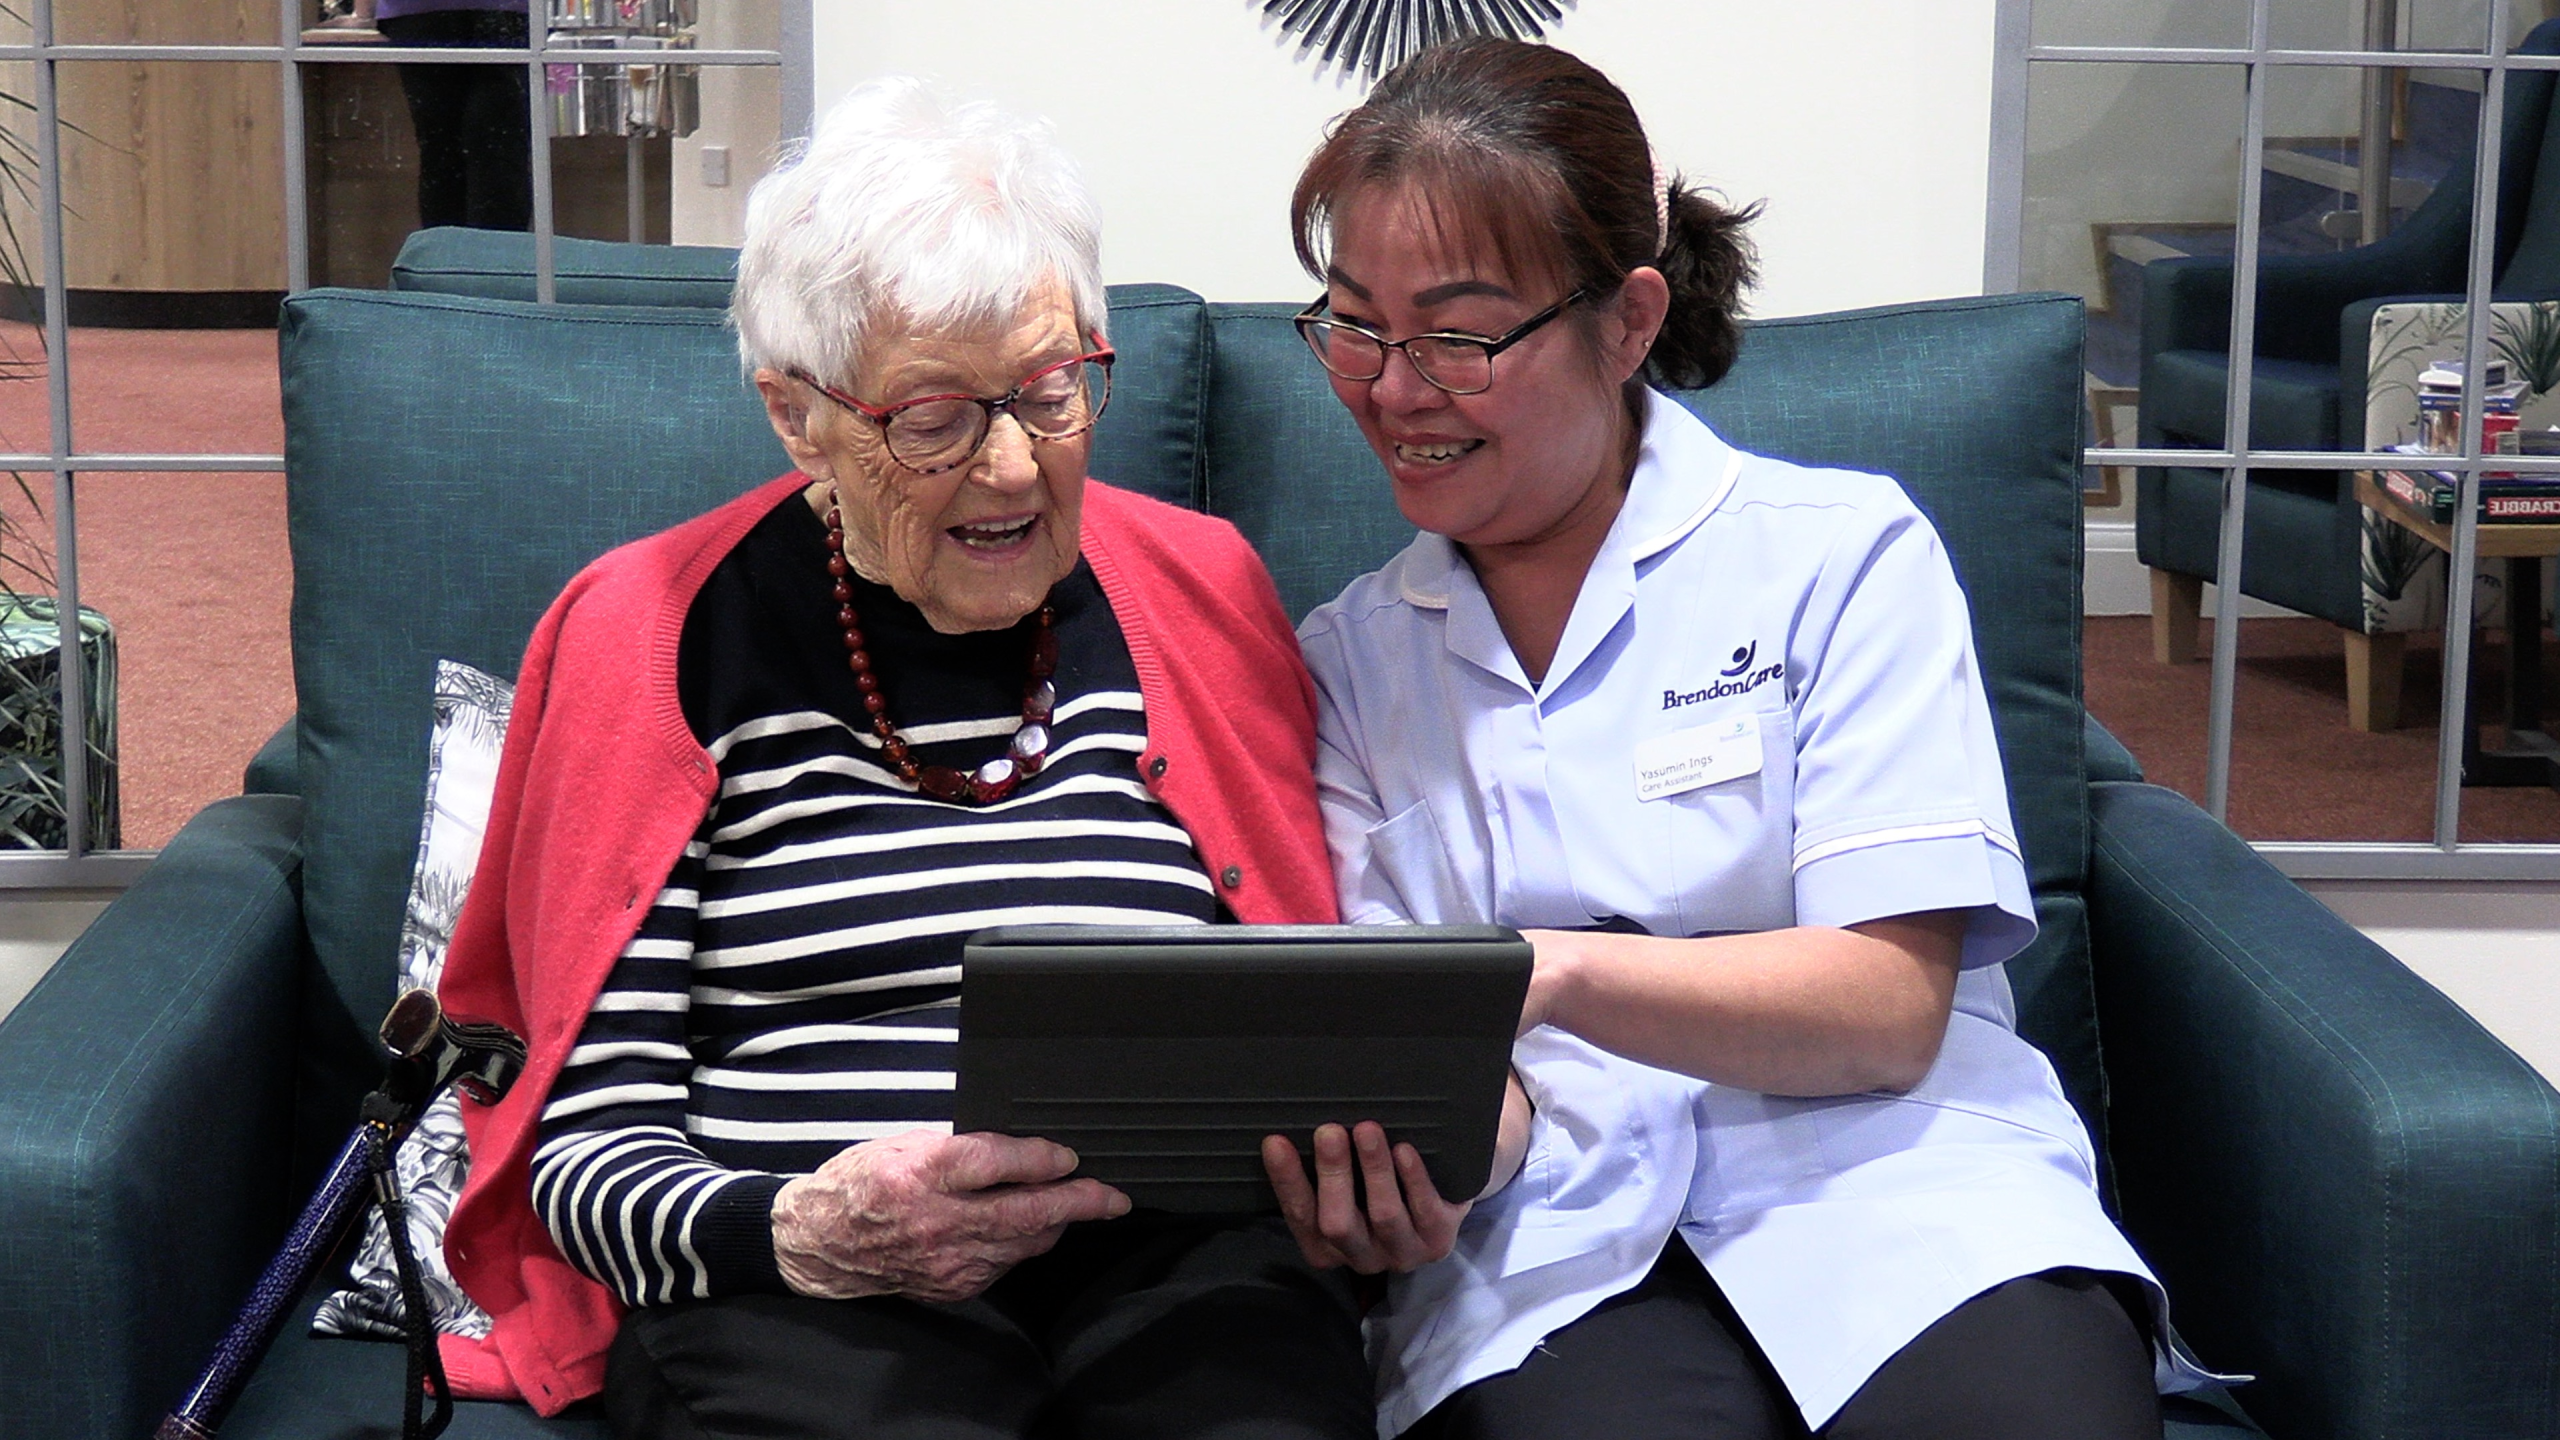 Digital: Older person and carer using ipad in care home